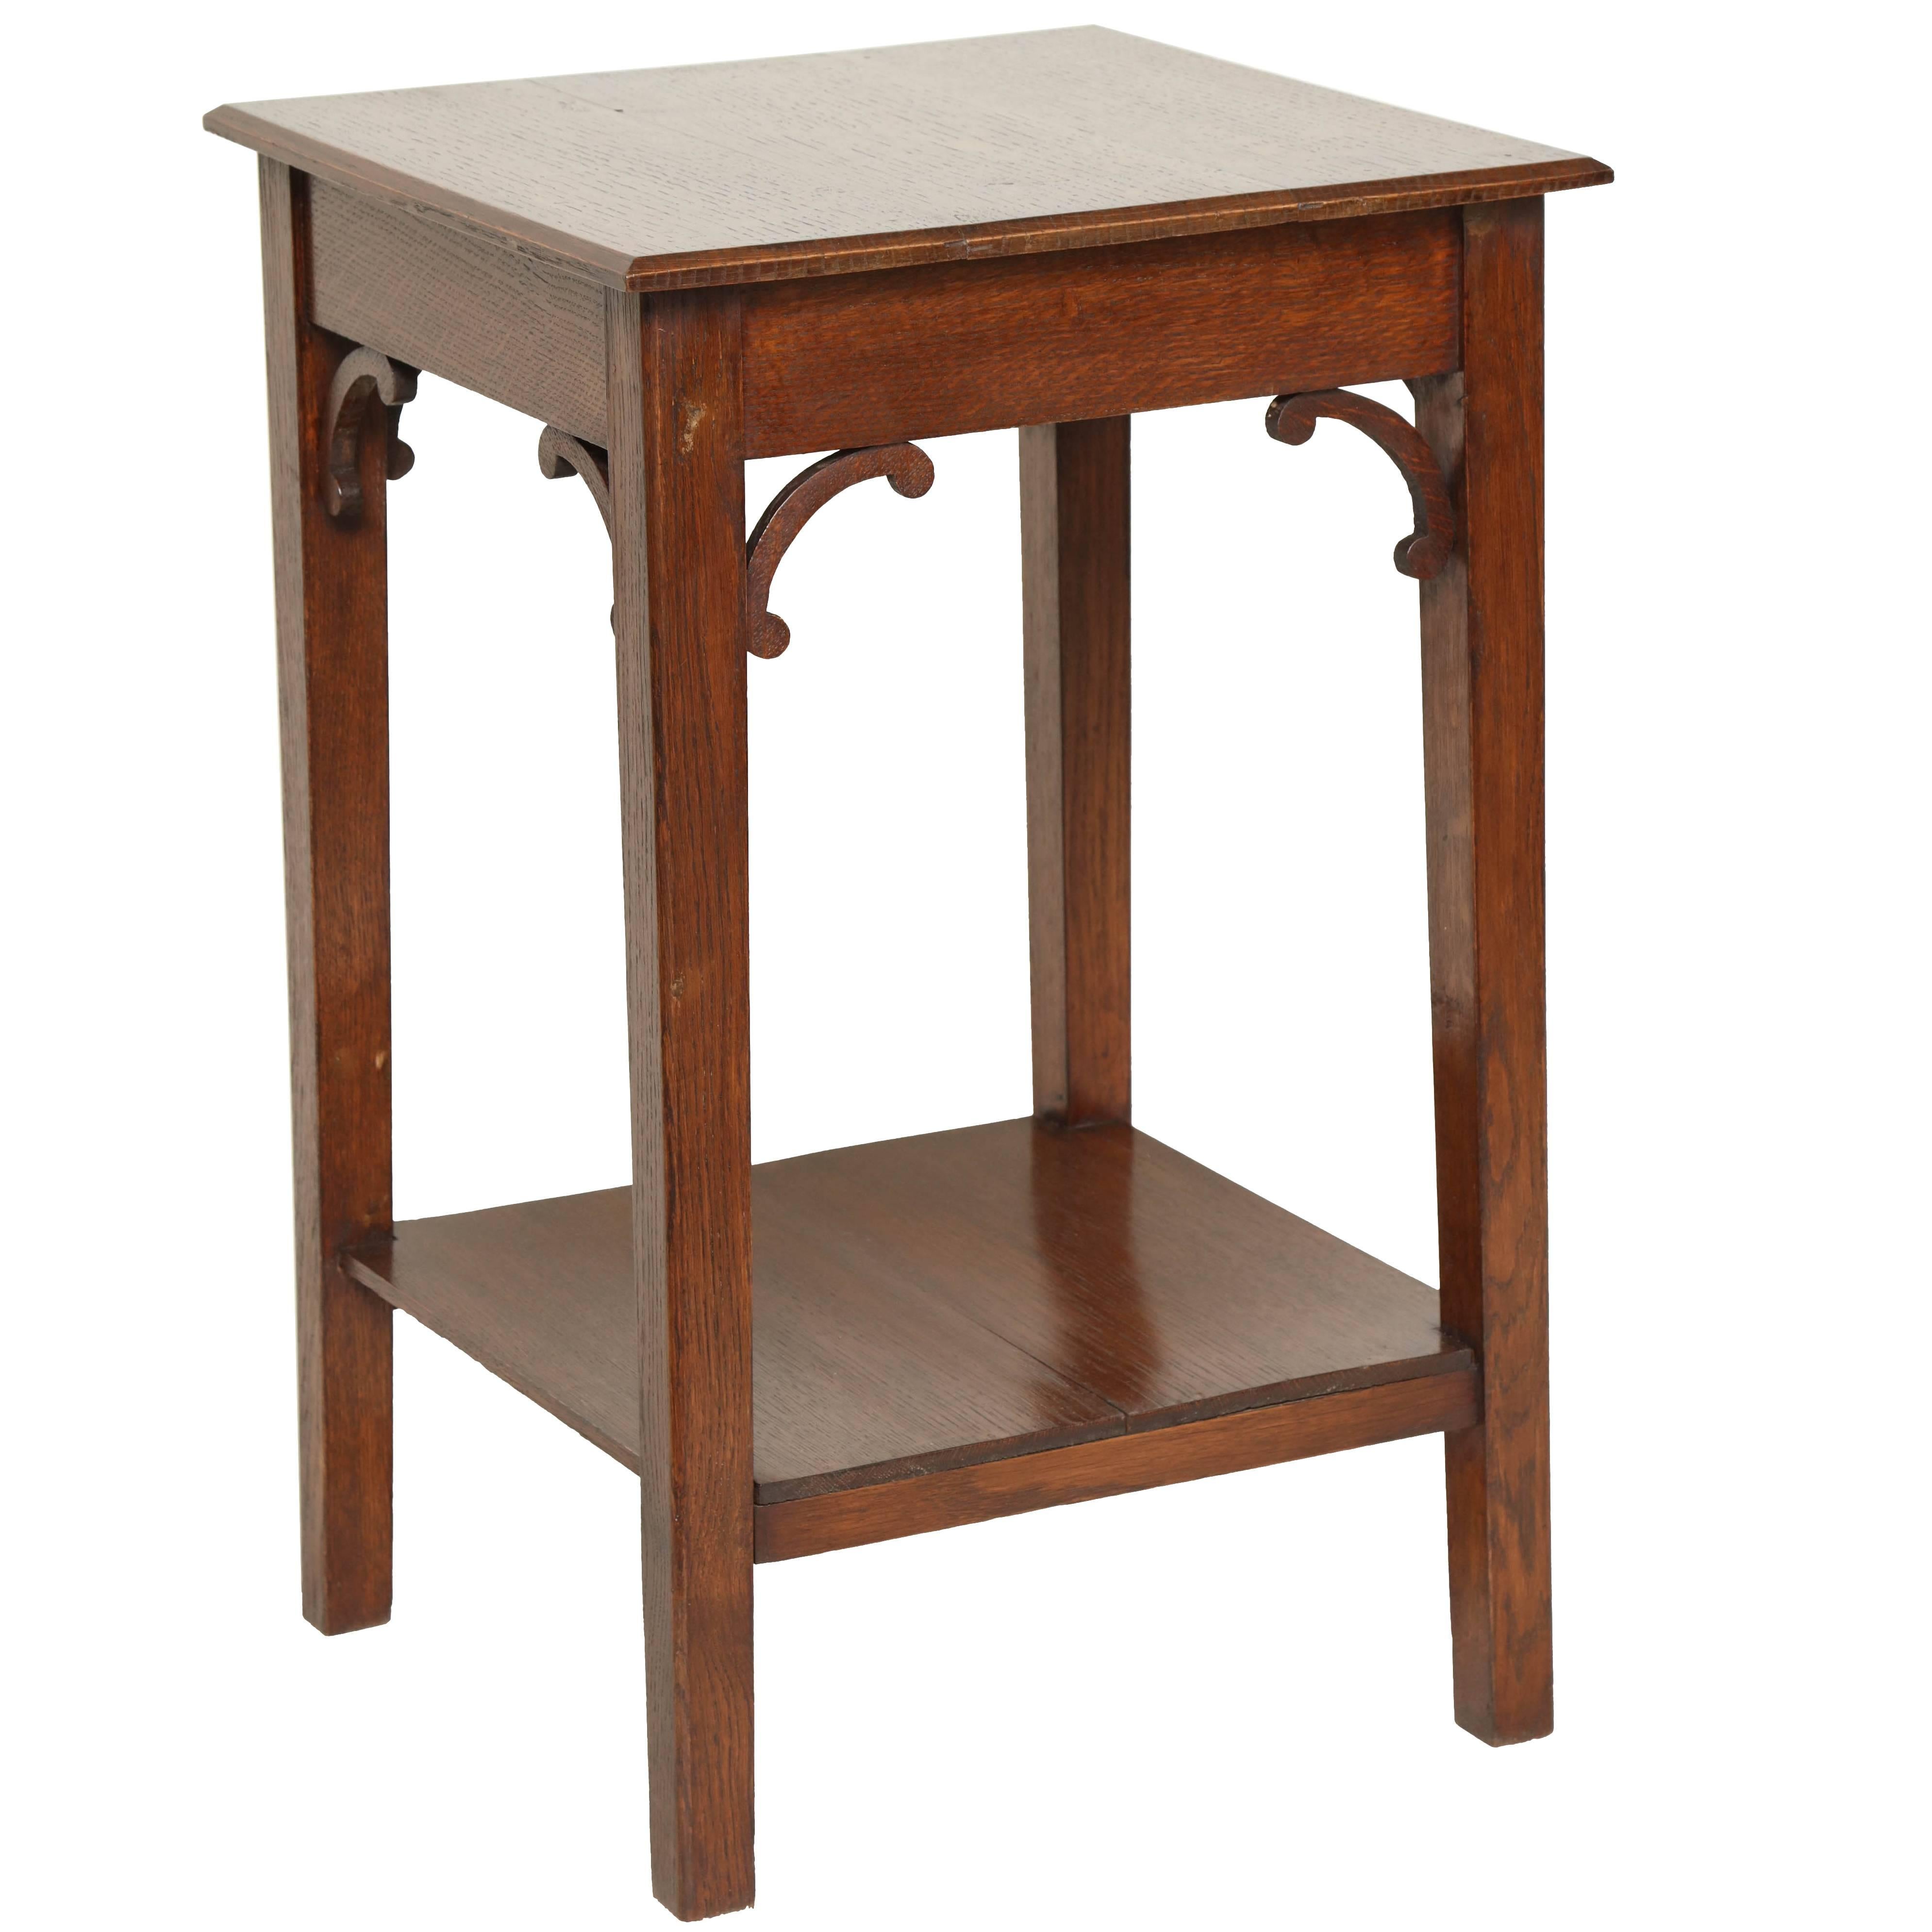 English Arts and Crafts Oak Table